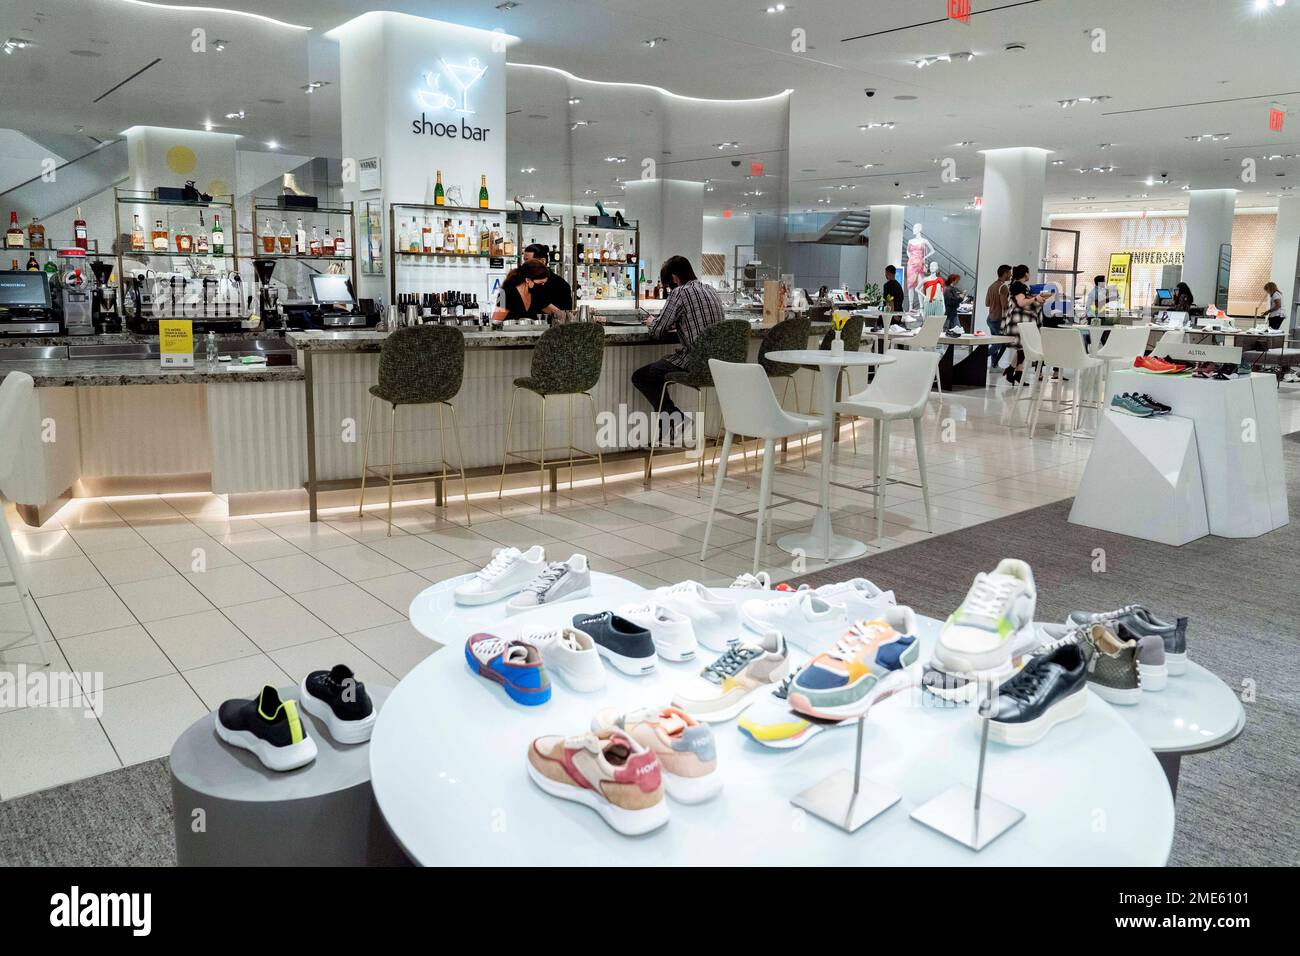 The Shoe Bar in the shoe department in the new Nordstrom